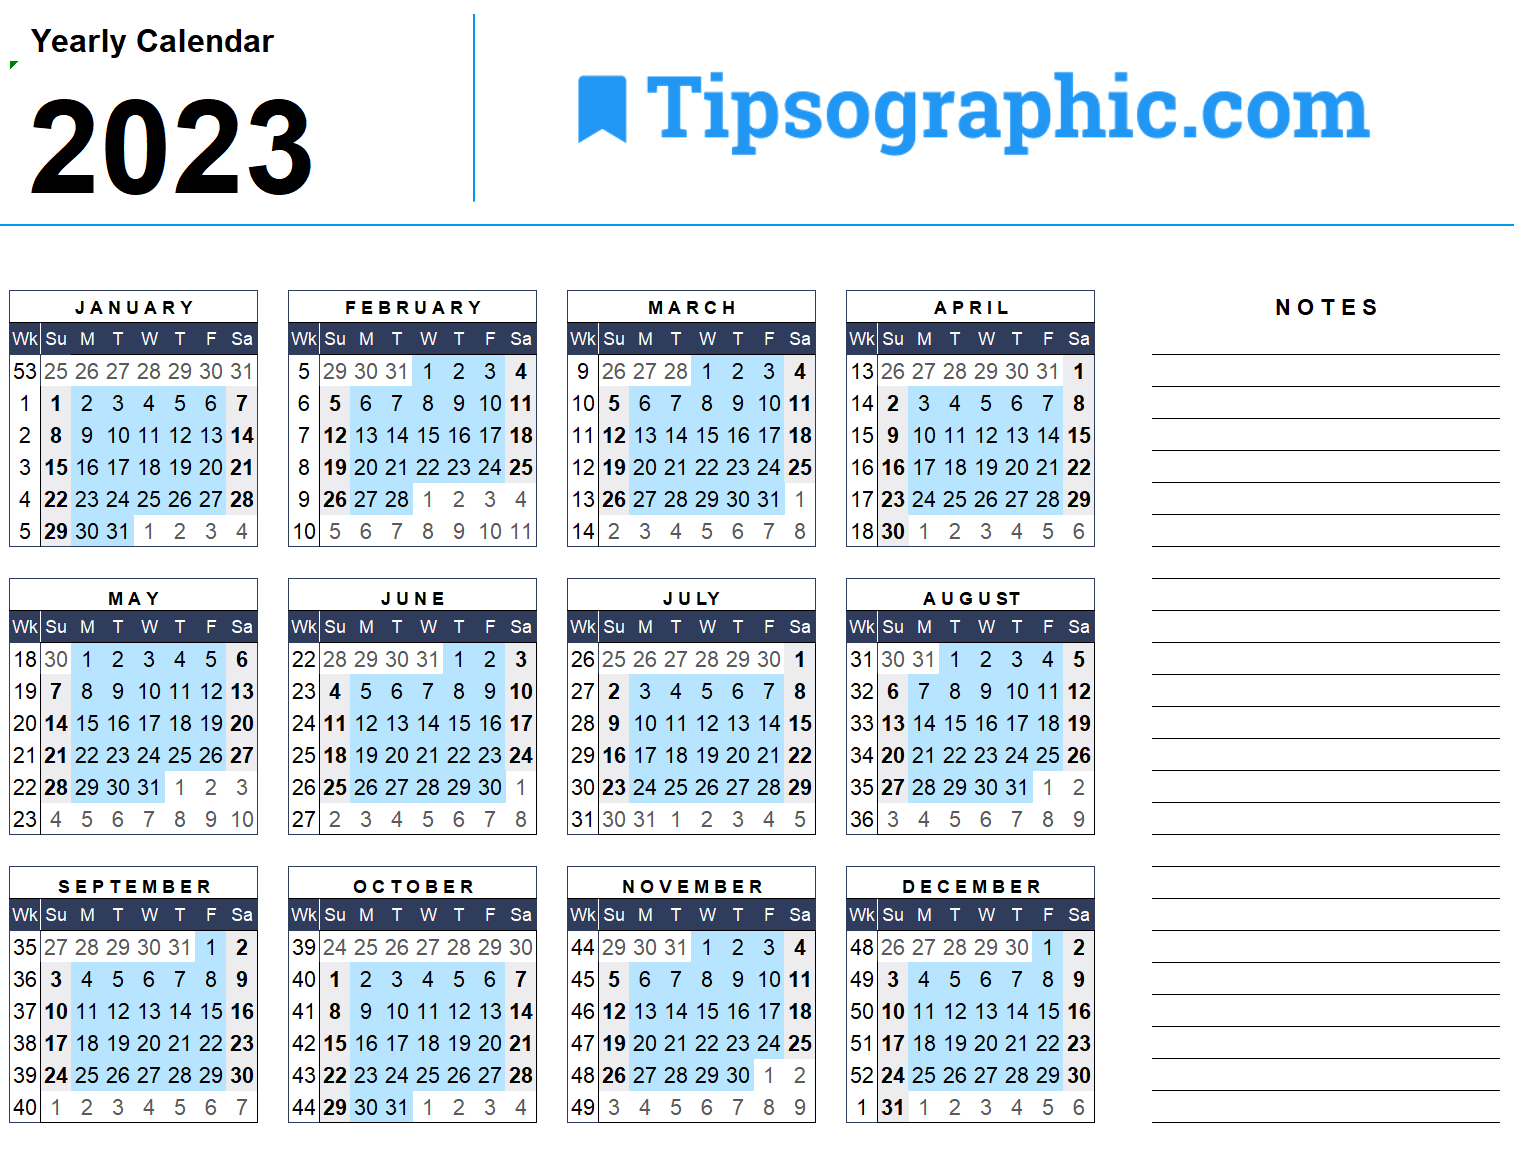 Download The 2023 Yearly Calendar With Week Numbers Free Download